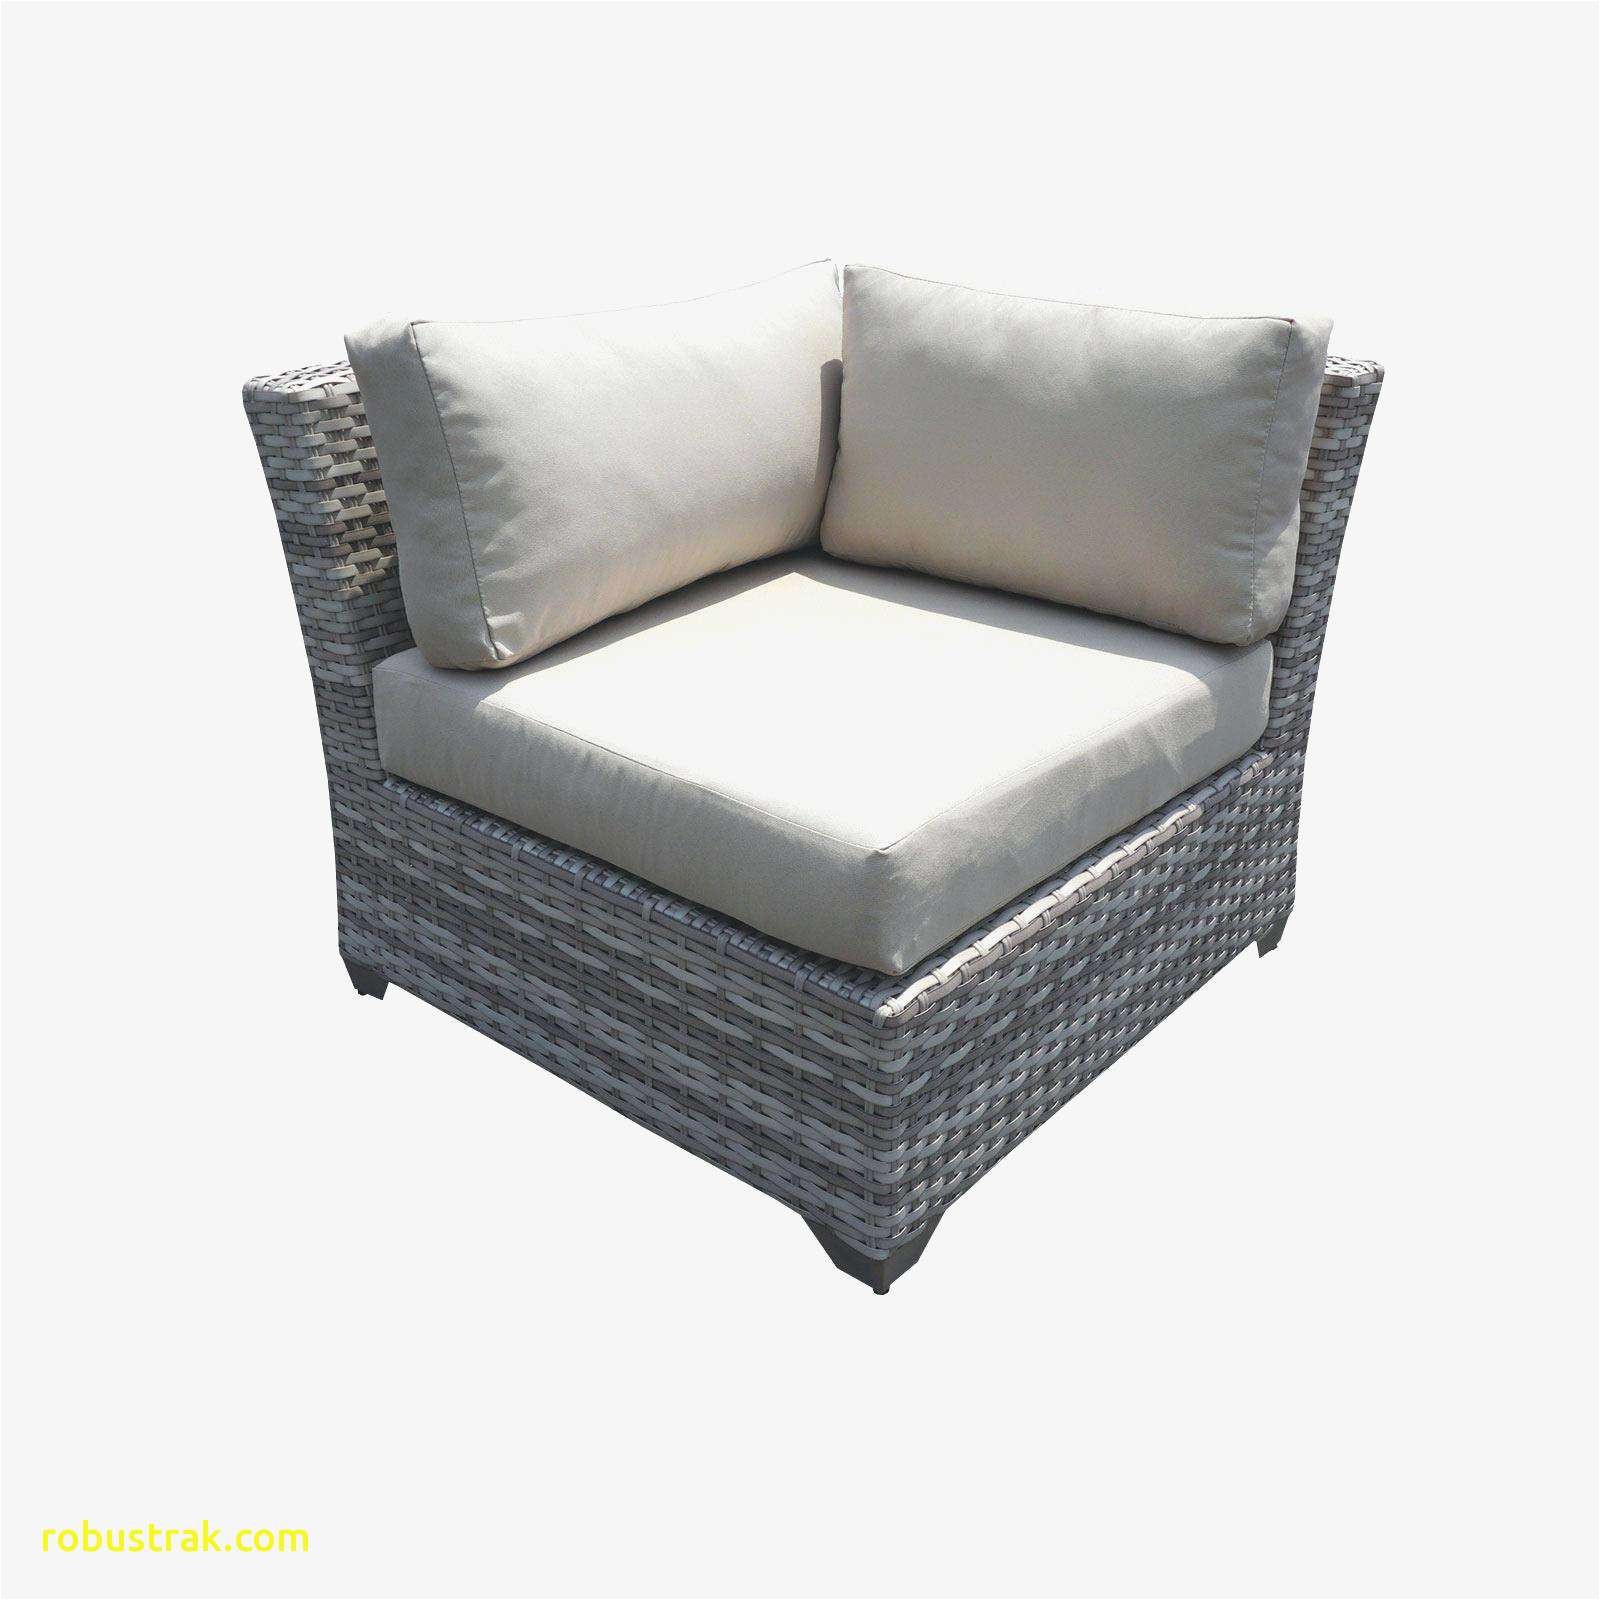 luxury sectional sofas new outdoor sofa 0d patio chairs sale replacement cushions design luxury